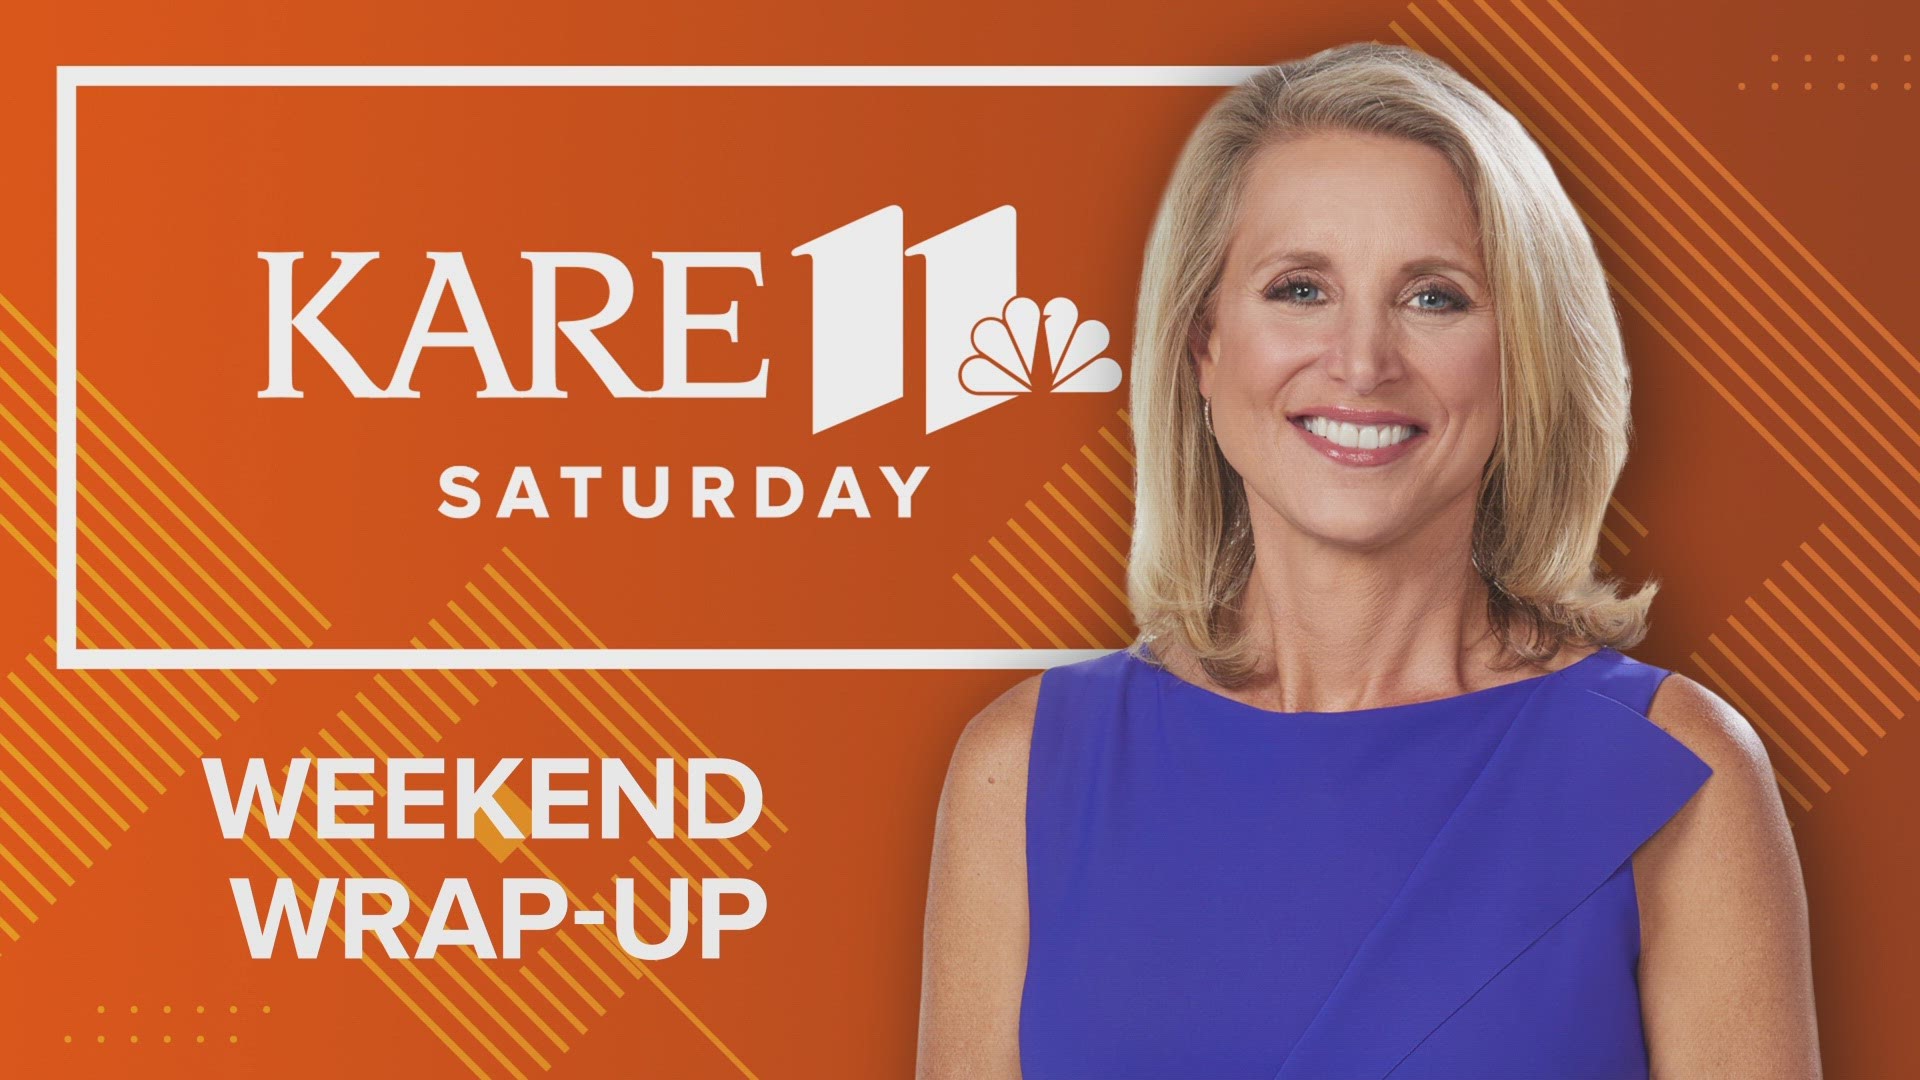 Check out the best segments from the KARE 11 Saturday show on May 27, 2023.